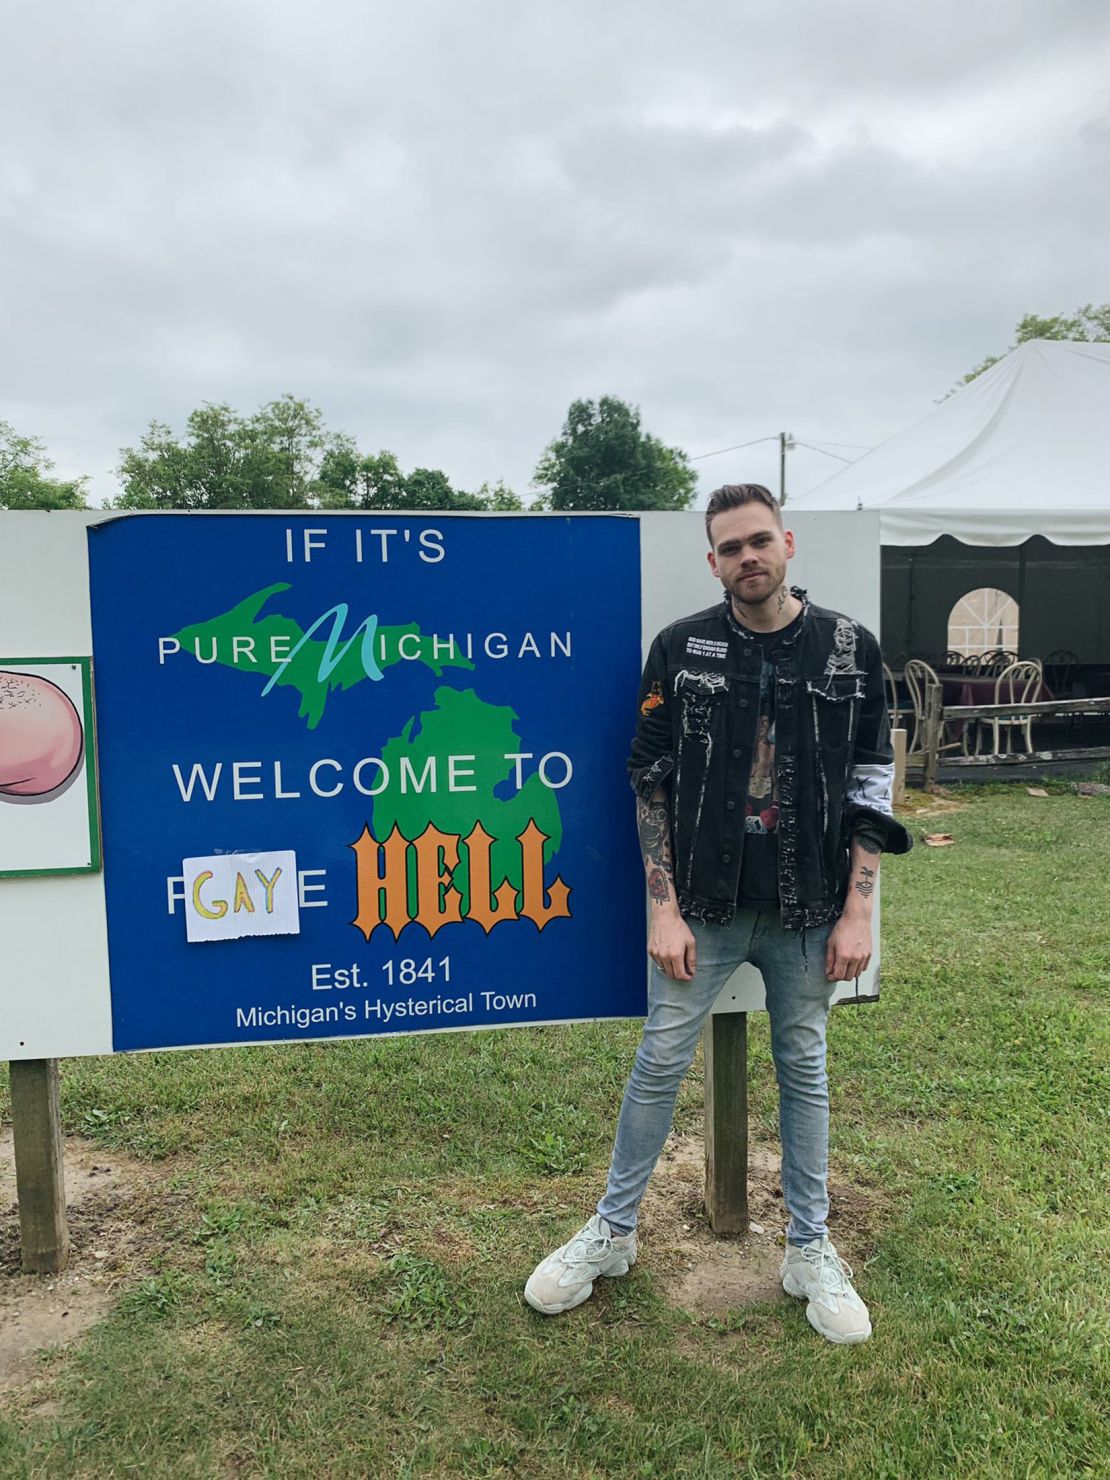 Youtuber Elijah Daniel bought the town of Hell and renamed it Gay Hell